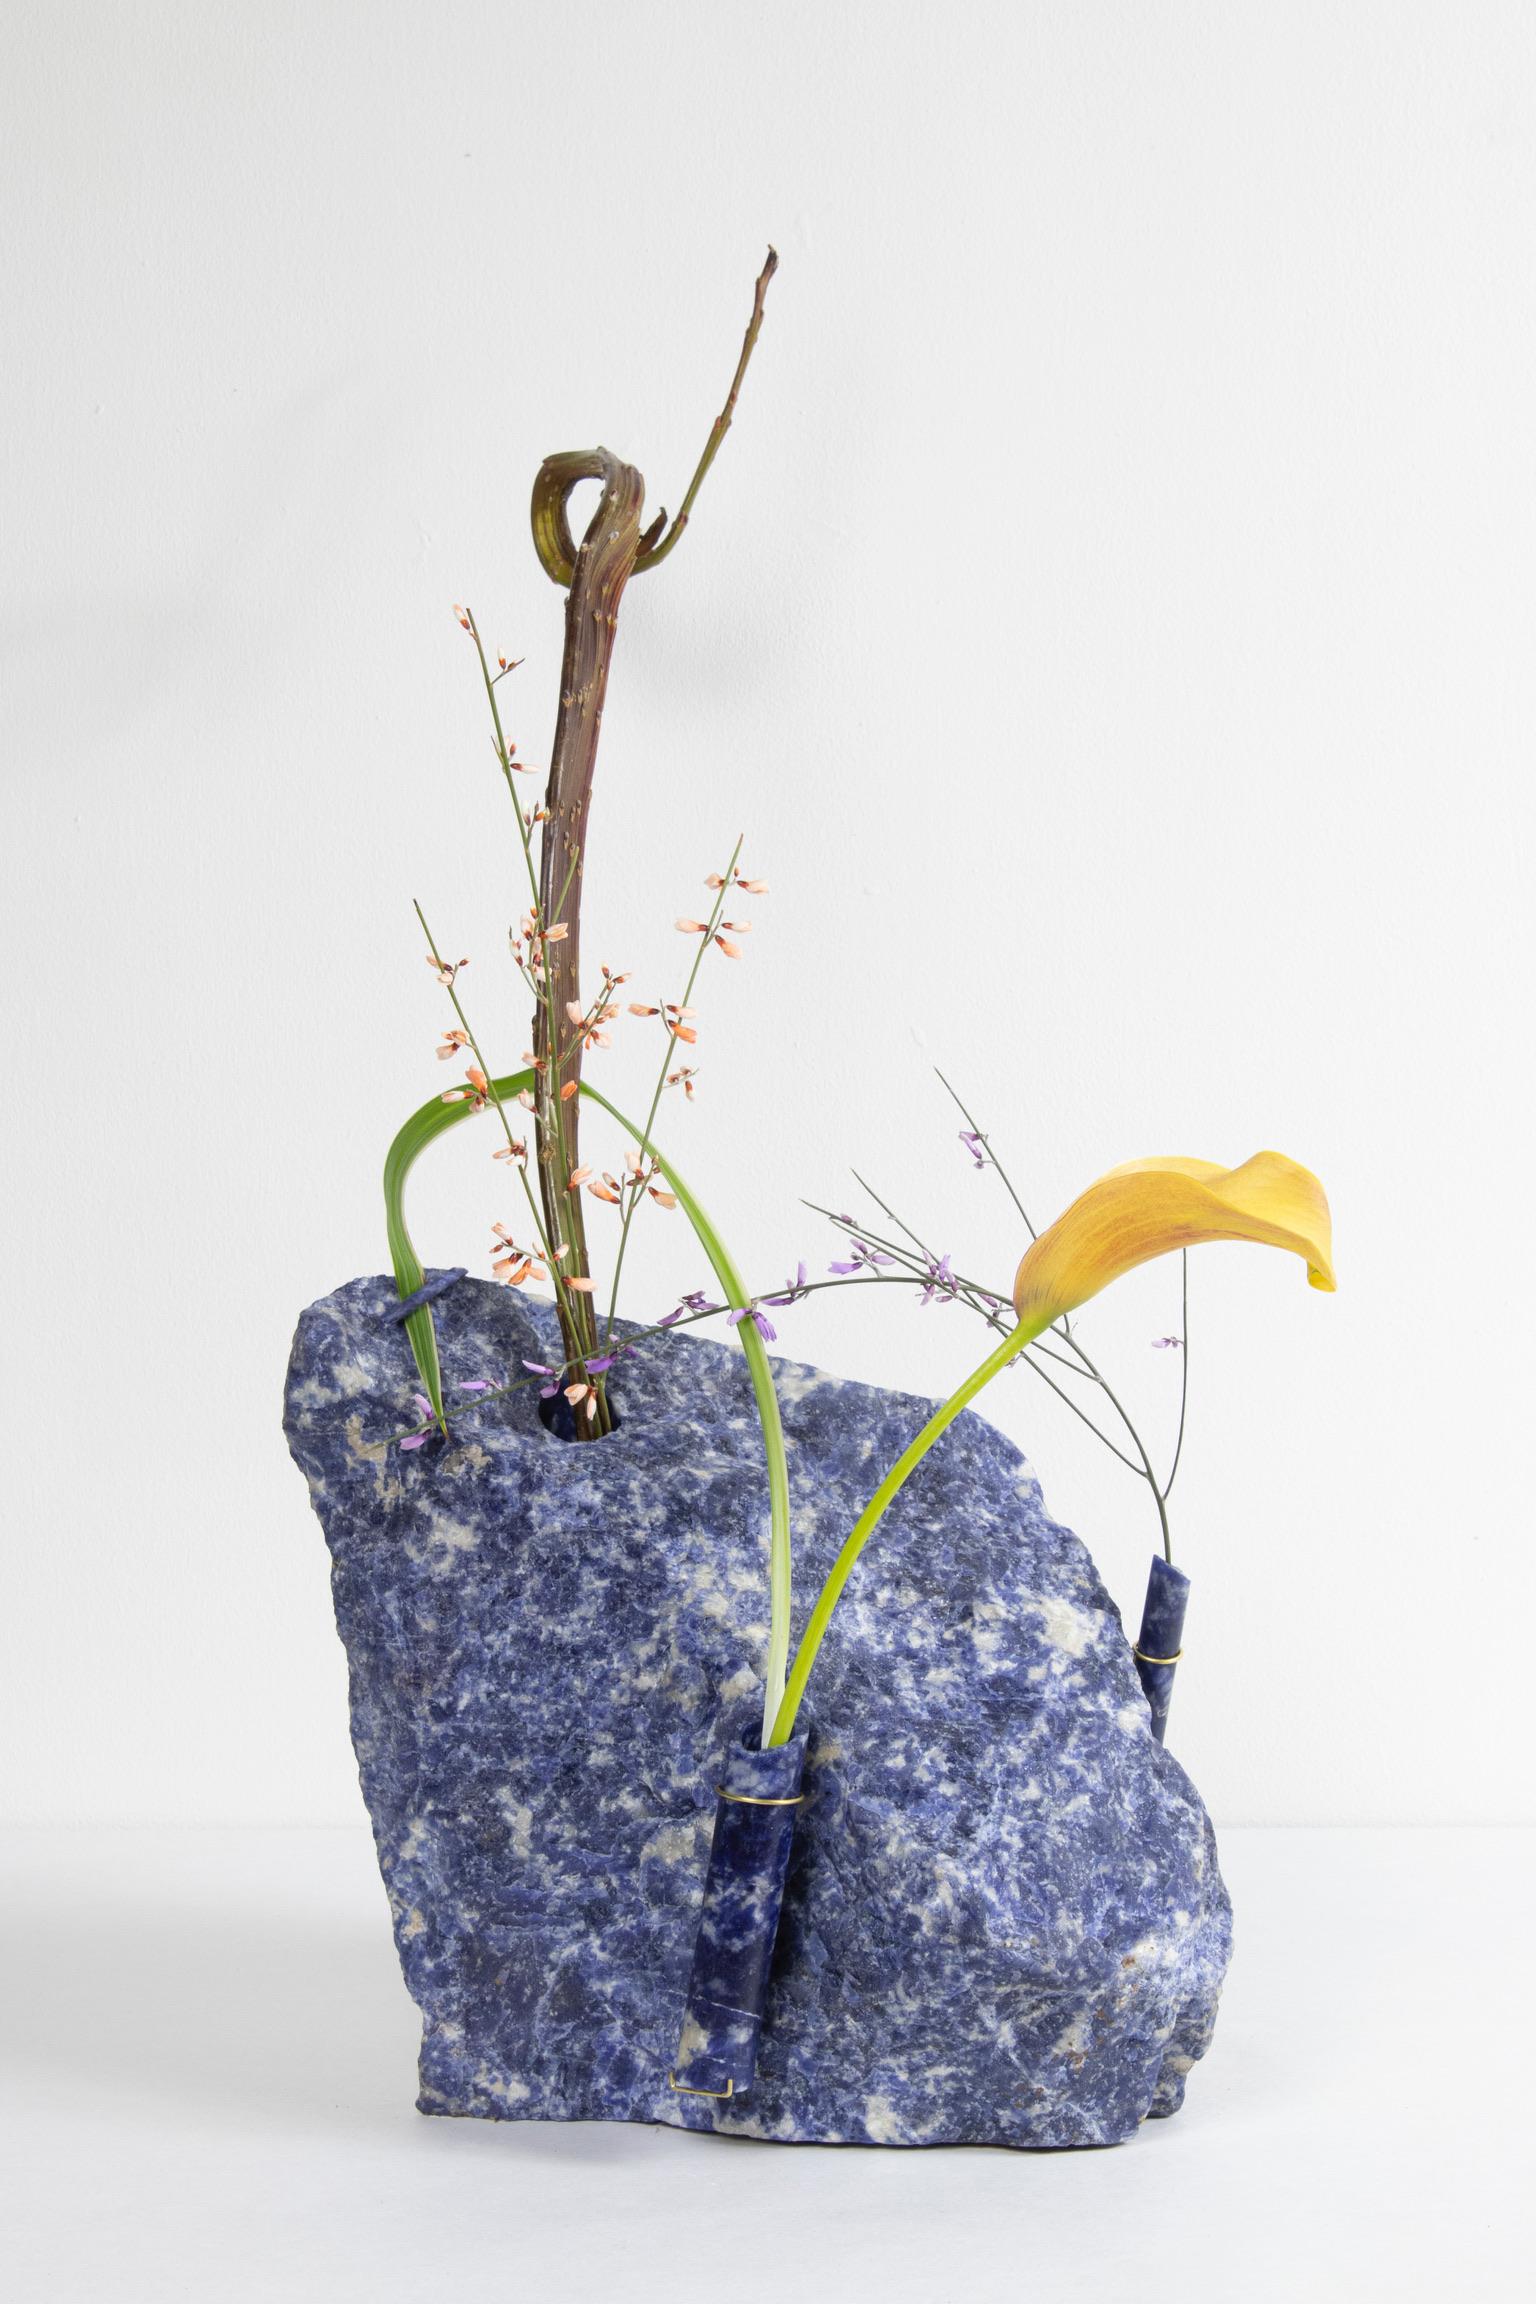 Medium Sodalite Flower Vessel by Studio DO
Dimensions: D 23 x W 16 x H 24 cm
Materials: Sodalite, brass.
15 kg.

Flowers are intrinsically connected with composition and earth.
Influenced by varied vessels from past to present such as the dutch